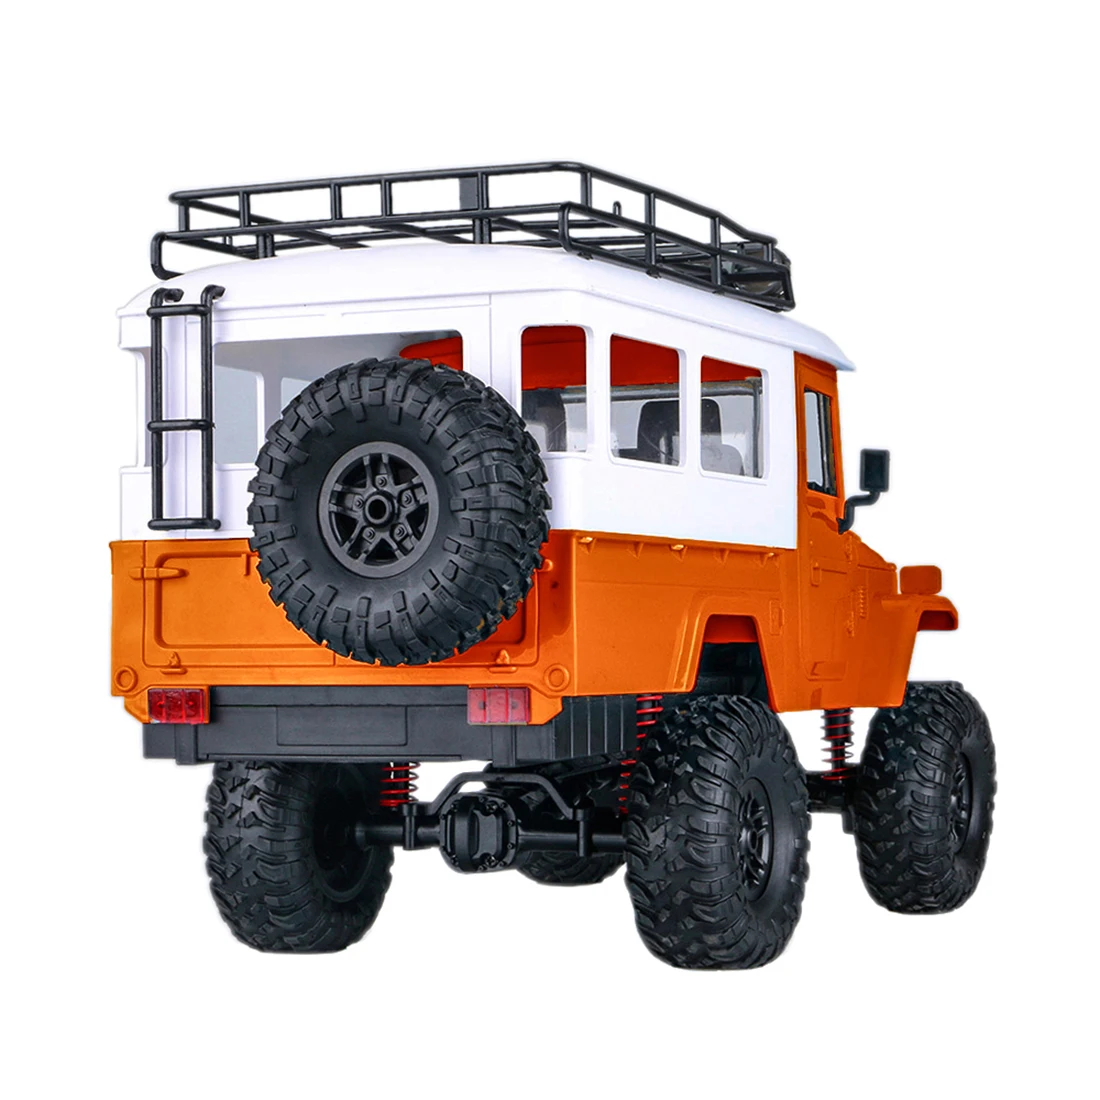 

RC Car MN40 1:12 4WD 2.4Ghz Remote Control Climbing Off-Road Vehicle DIY Modified rc car D90